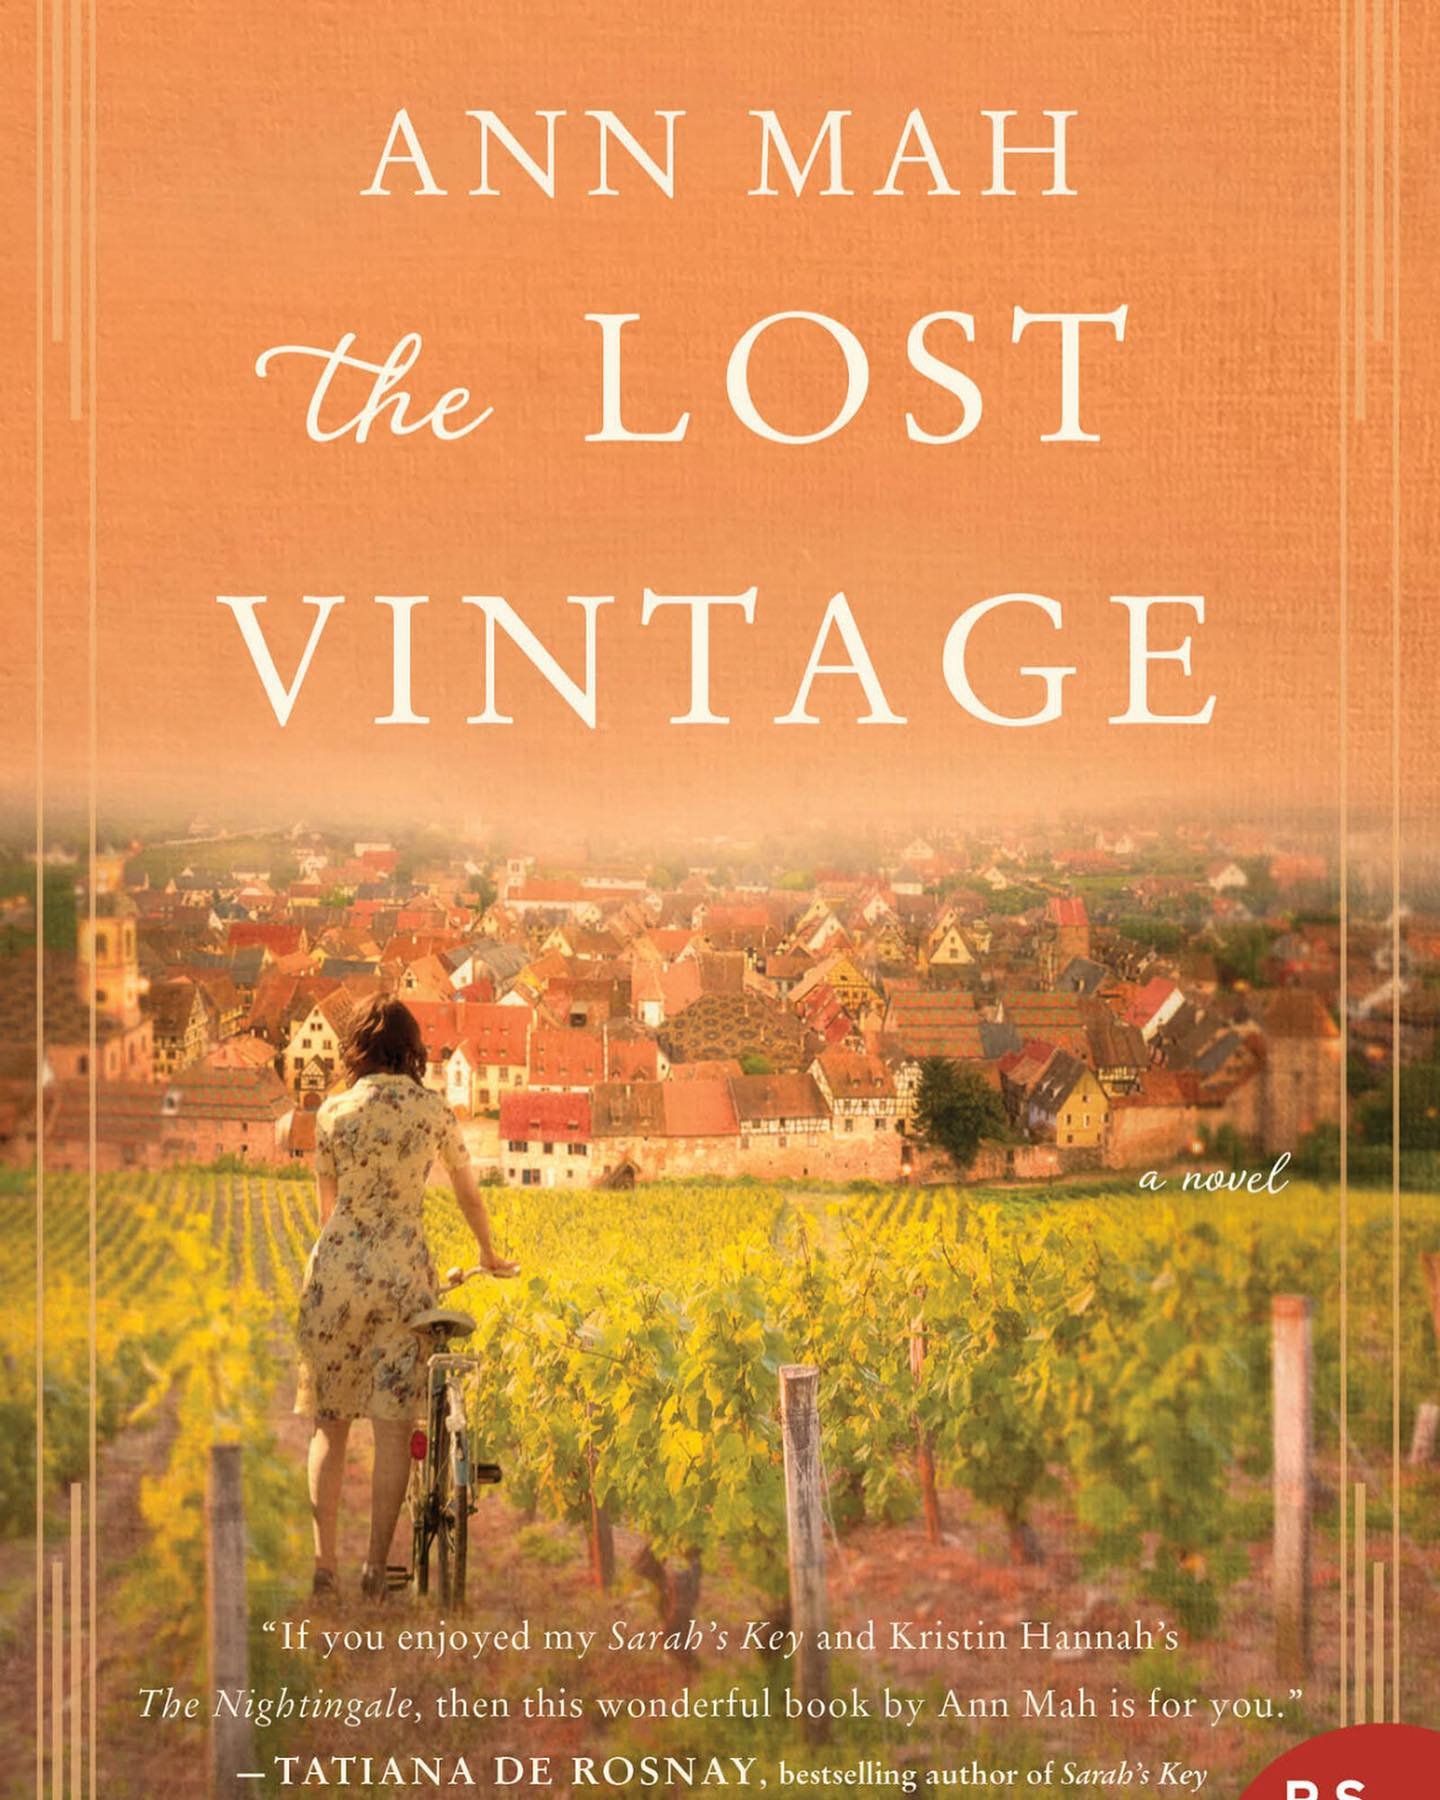 Gradually reading books related to the regions of France we will be visiting this year. My latest book is set in Burgundy is The Last Vintage by Ann Mah
 🍇🍷🇫🇷
Holiday planning in full swing as we fill out our plans with amazing places to cycle, v